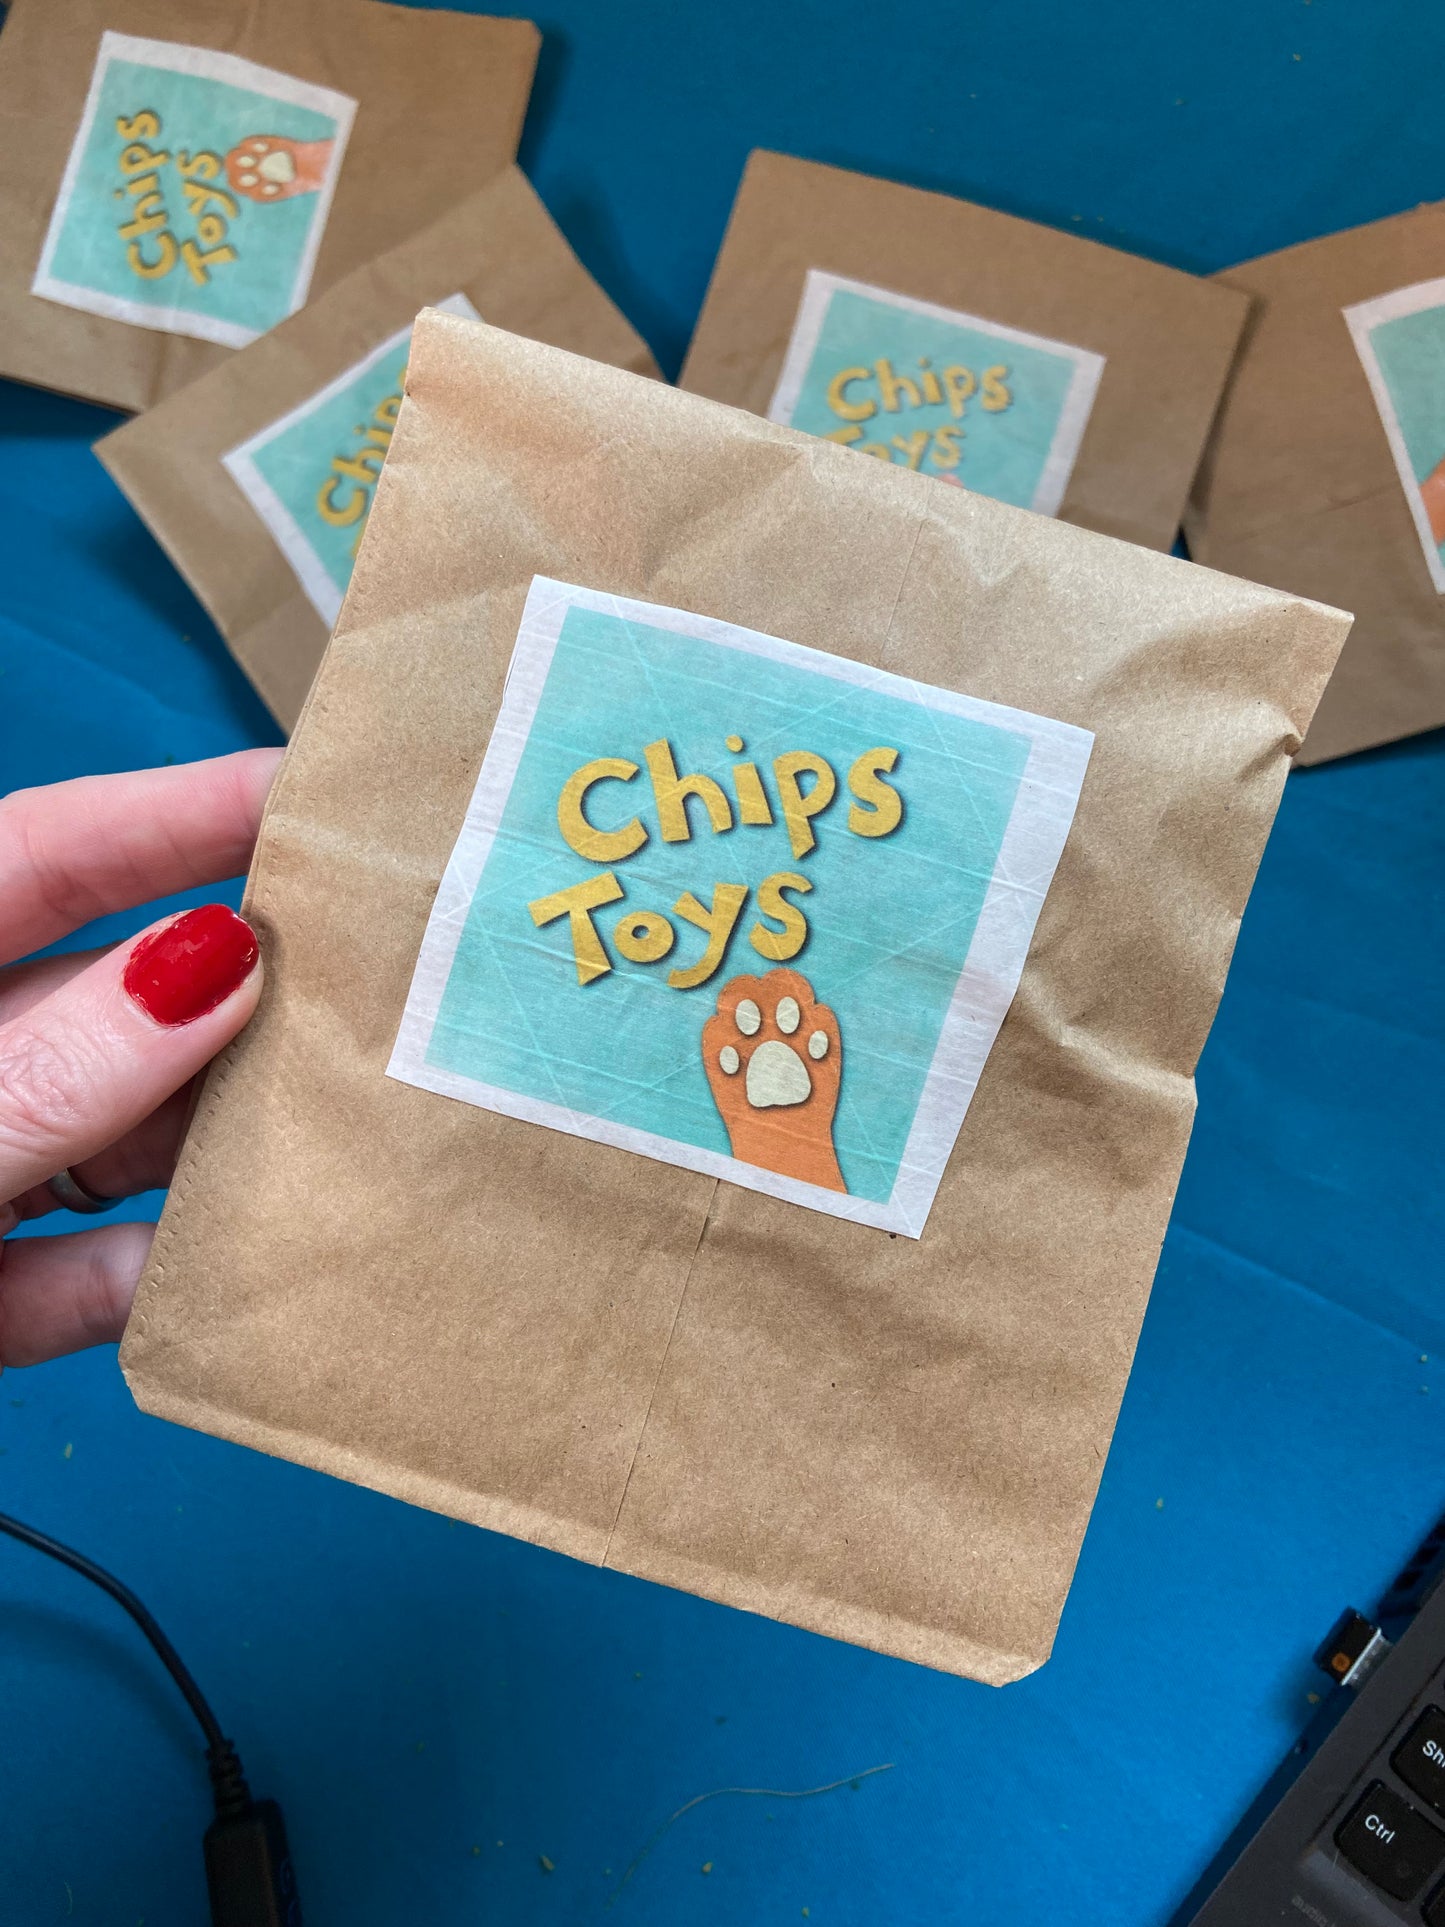 A person with red nail polish holds a brown paper bag. On the bag is a square sticker that says "Chips Toys" with an orange paw print drawing below the words. There are several more bags on a blue tablecloth in the background.